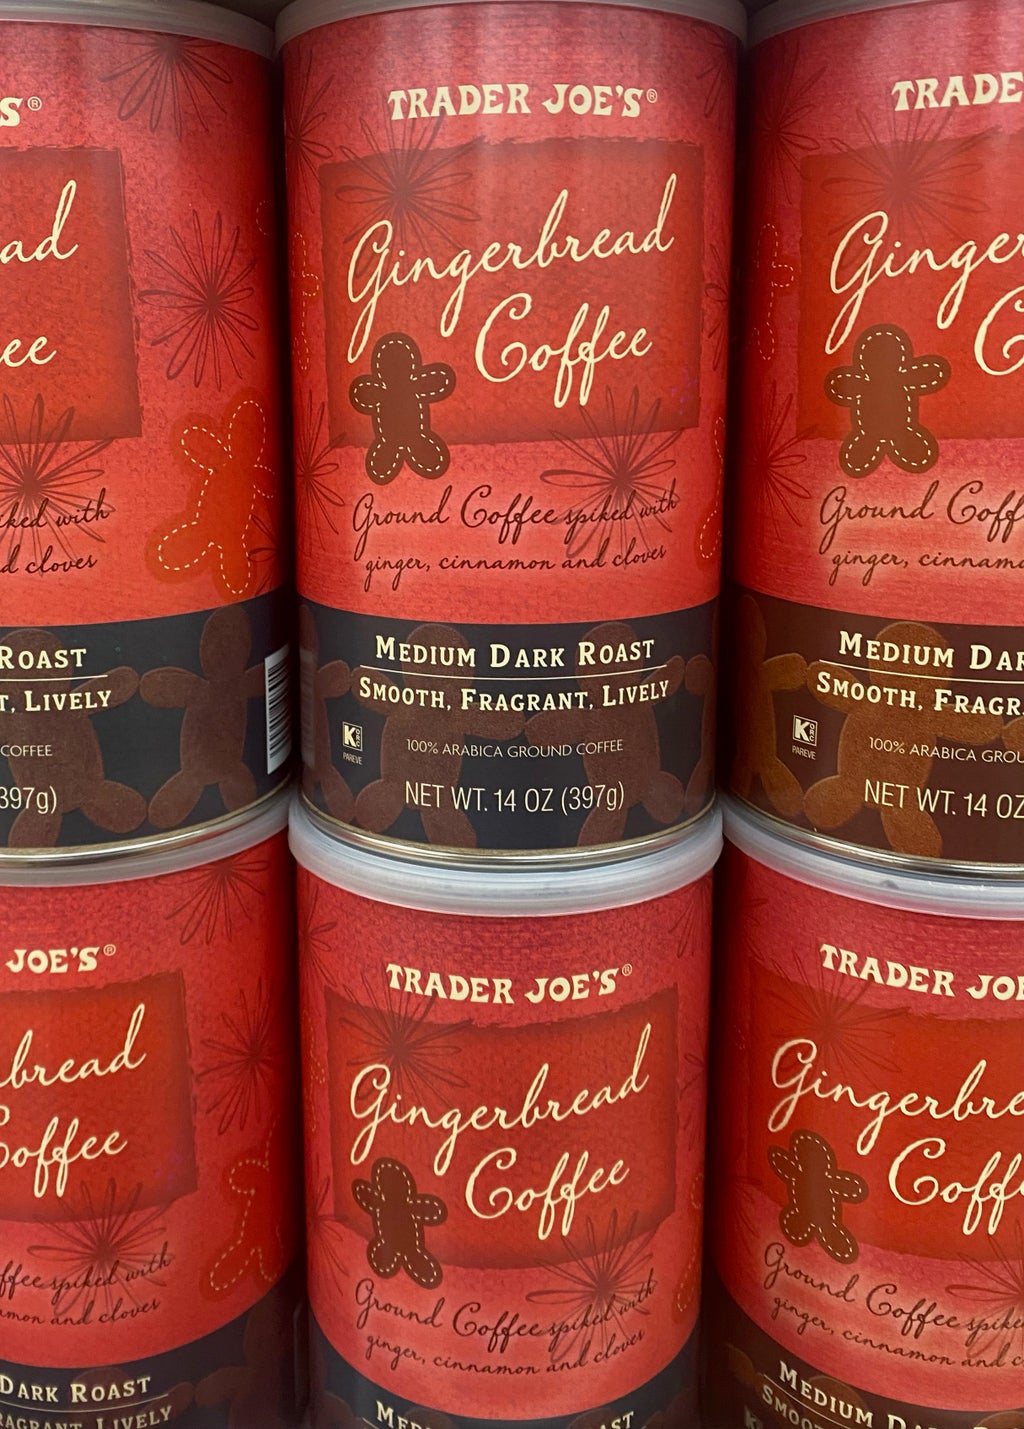 Gingerbread coffee from Trader Joes